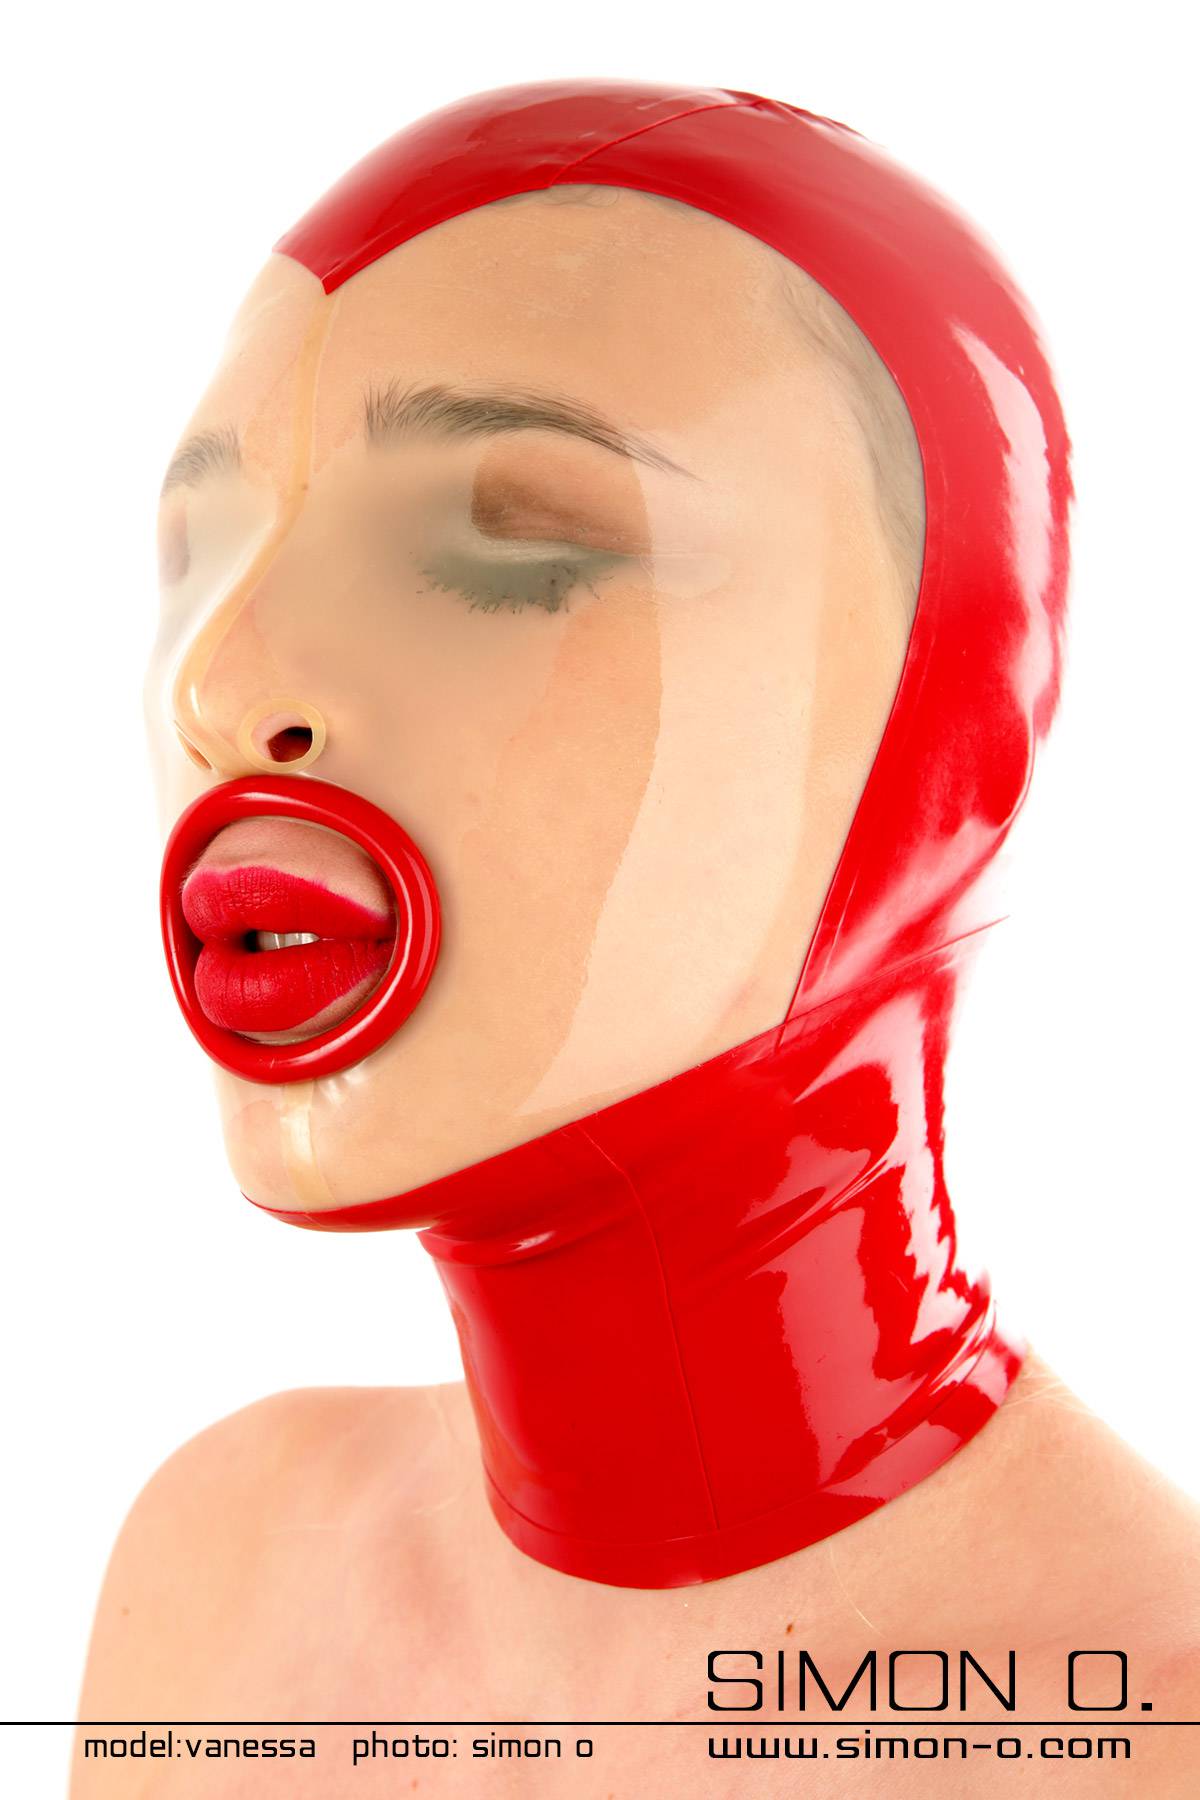 Black latex hood with transparent insert in the face area. Eyes closed and at the mouth there is a black ring